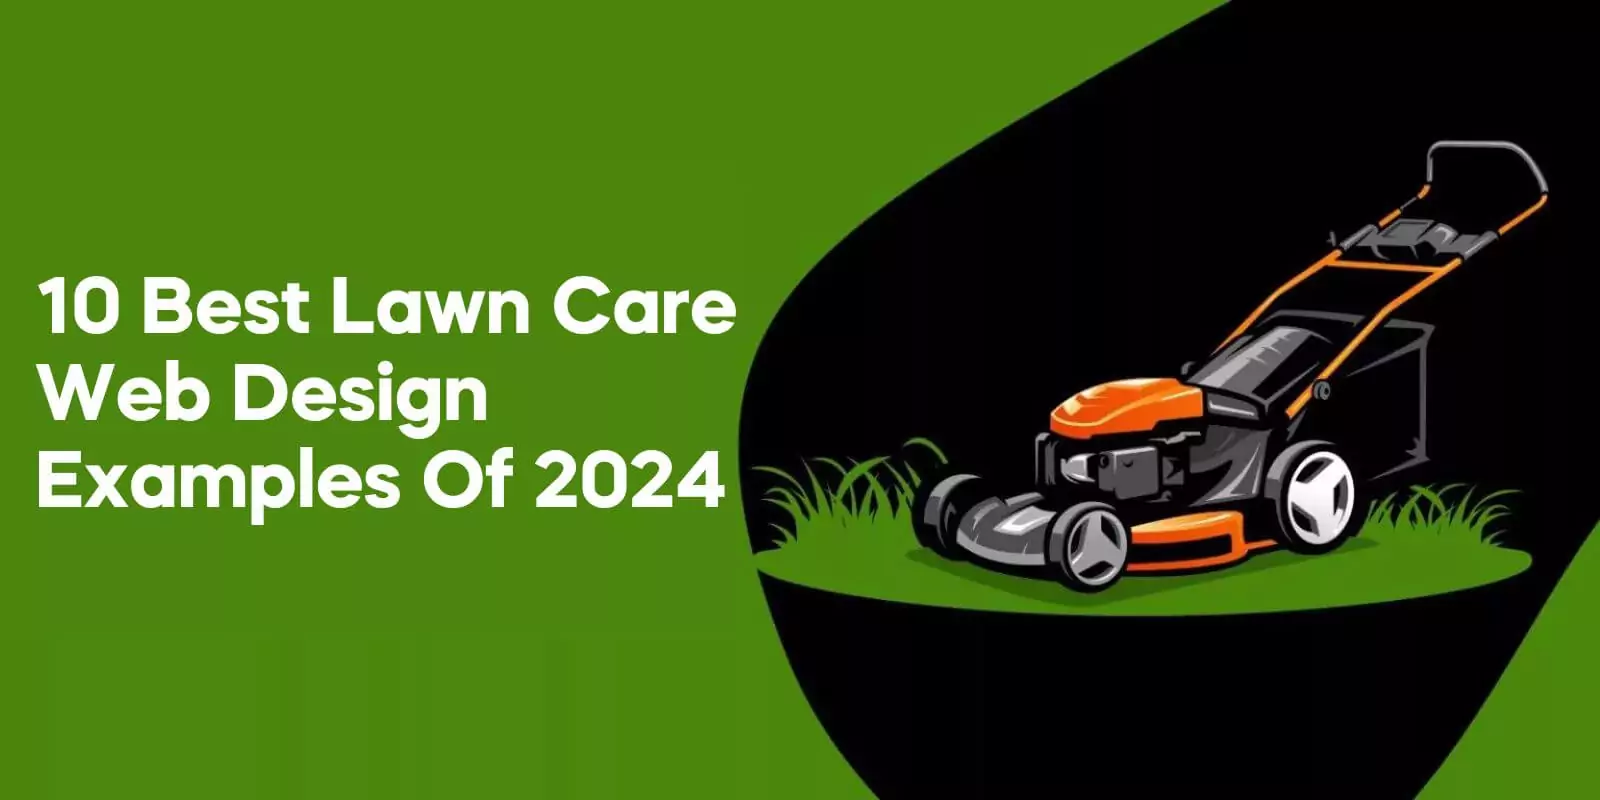 10 Best Lawn Care Web Design Examples of 2024